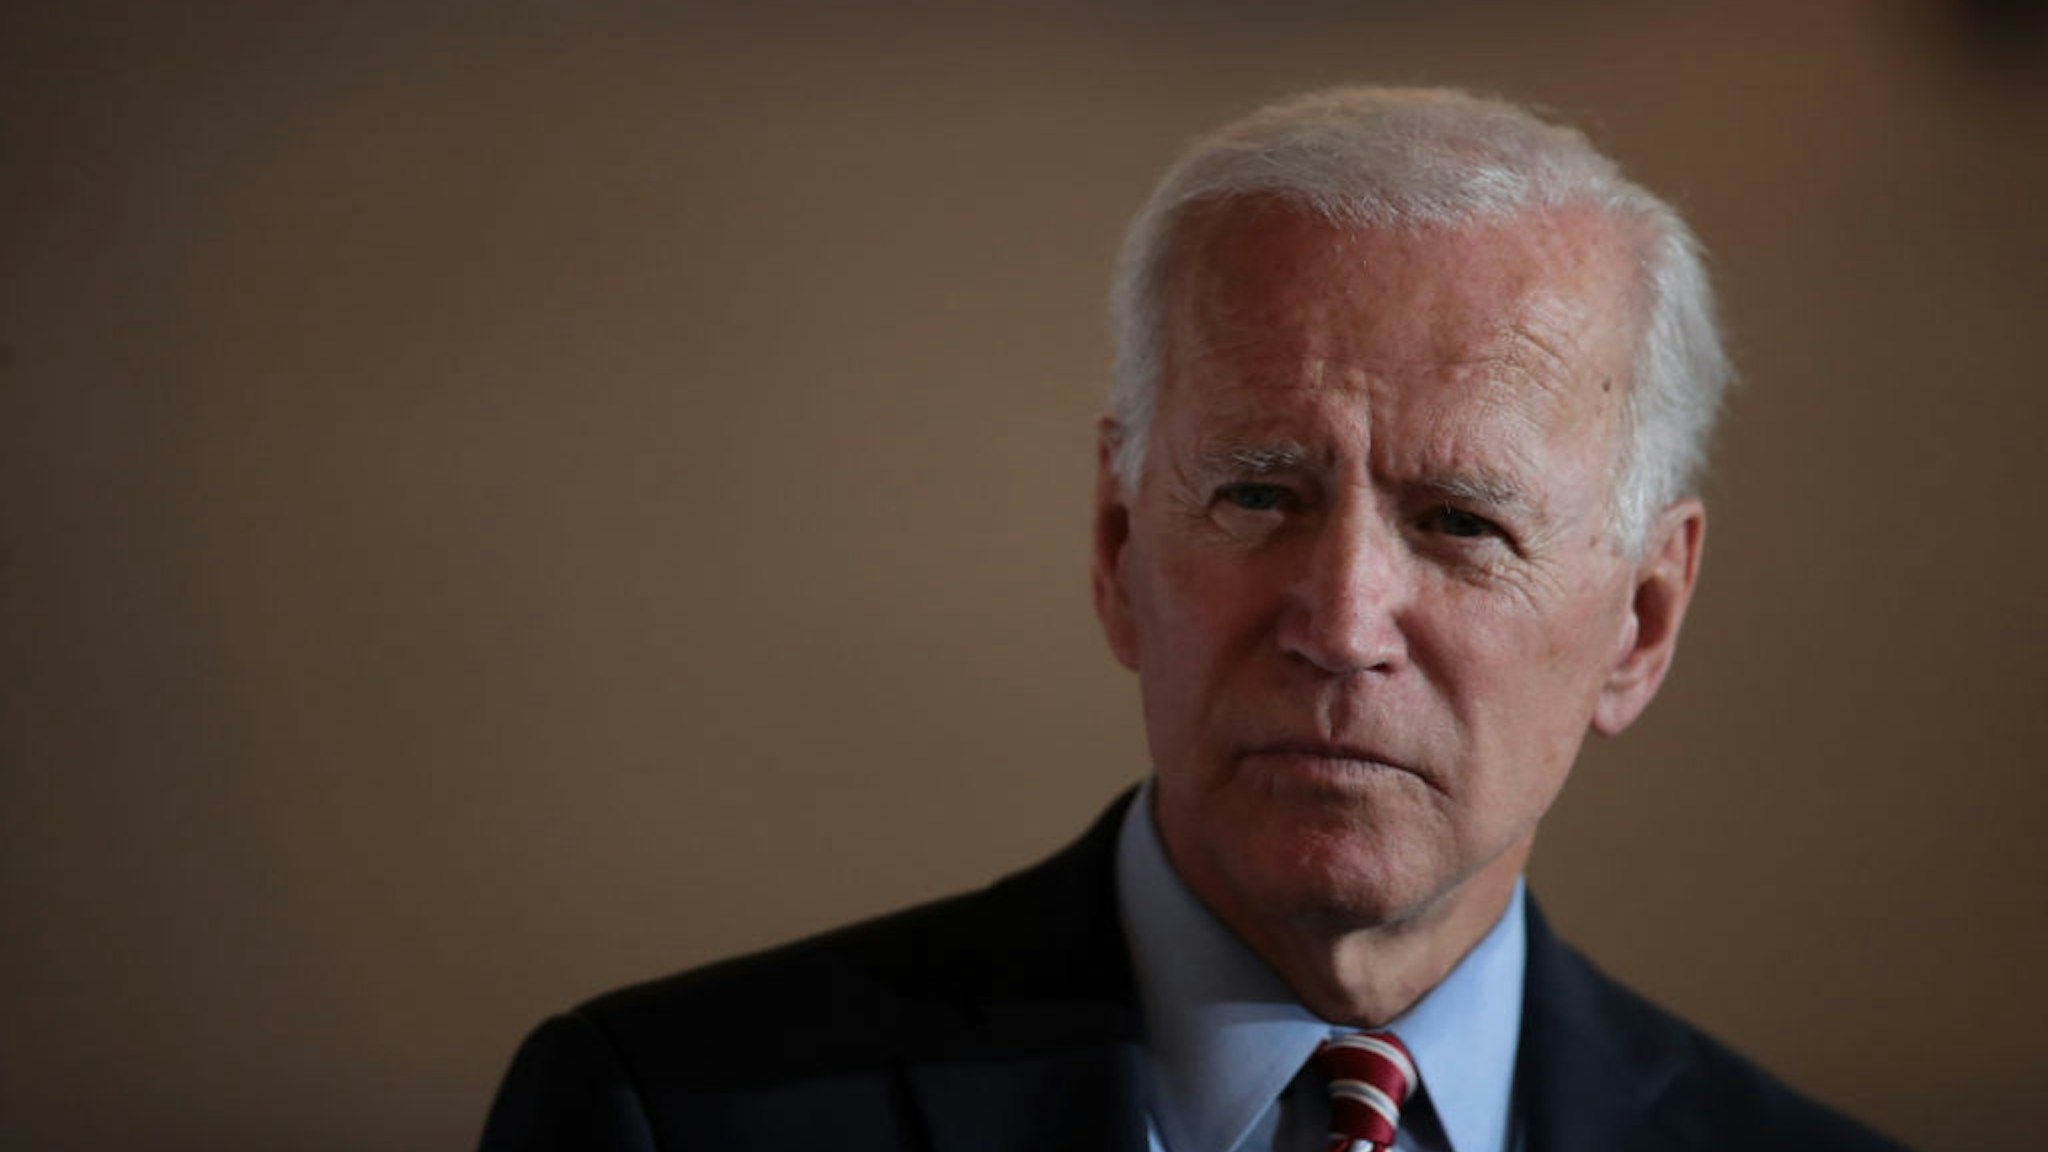 Joe Biden speaks to guests during a campaign stop at the Small Grand Things event center